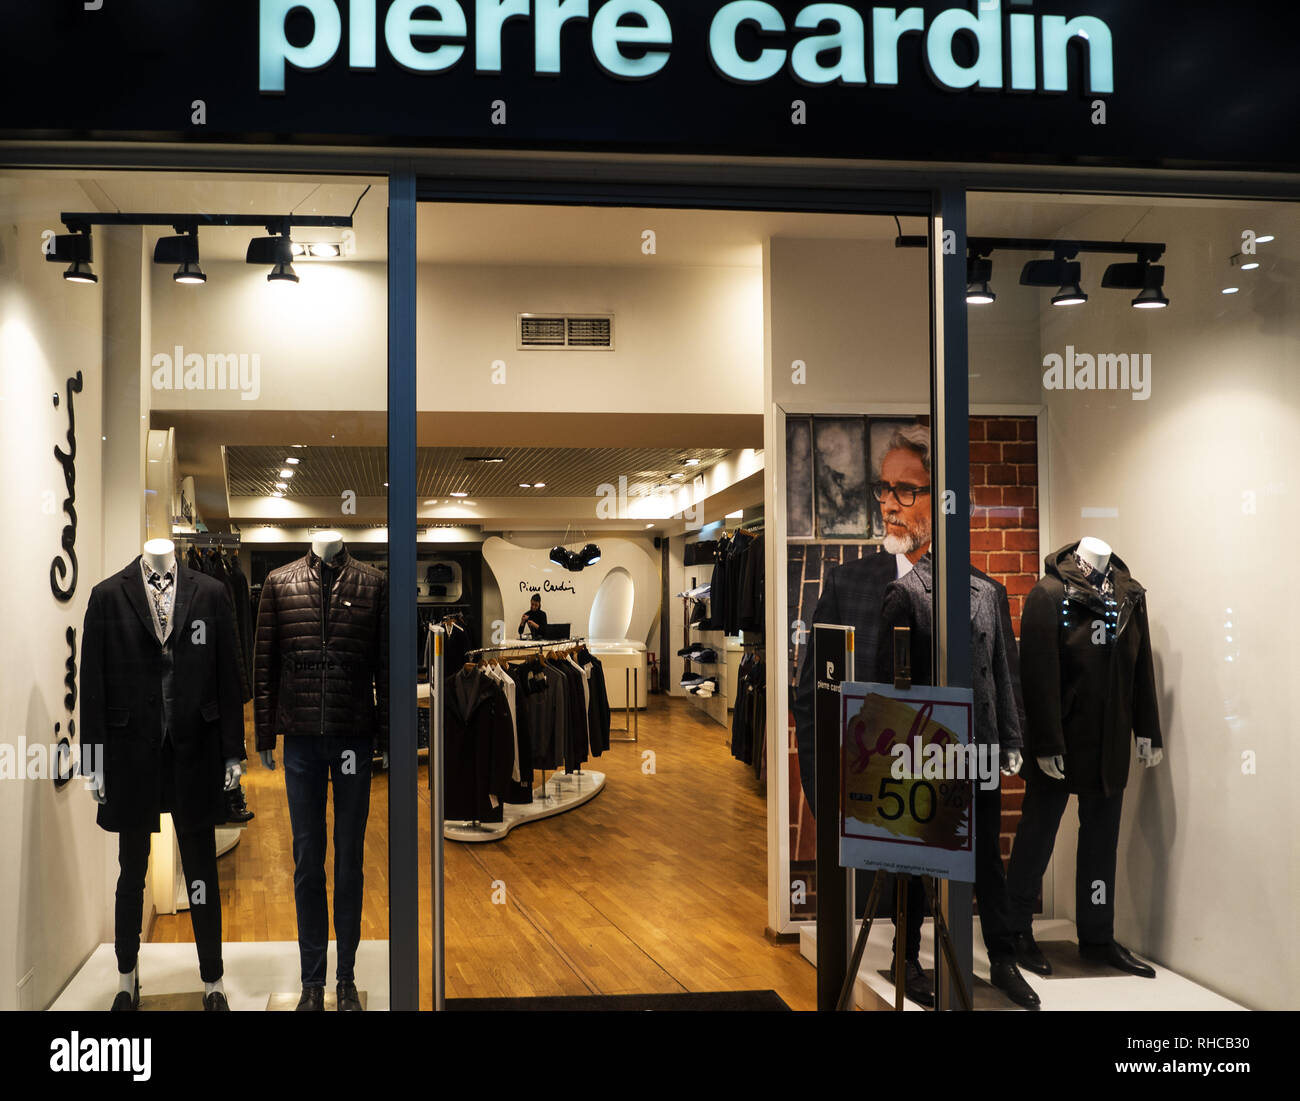 Pierre cardin logo hi-res stock photography and images - Alamy